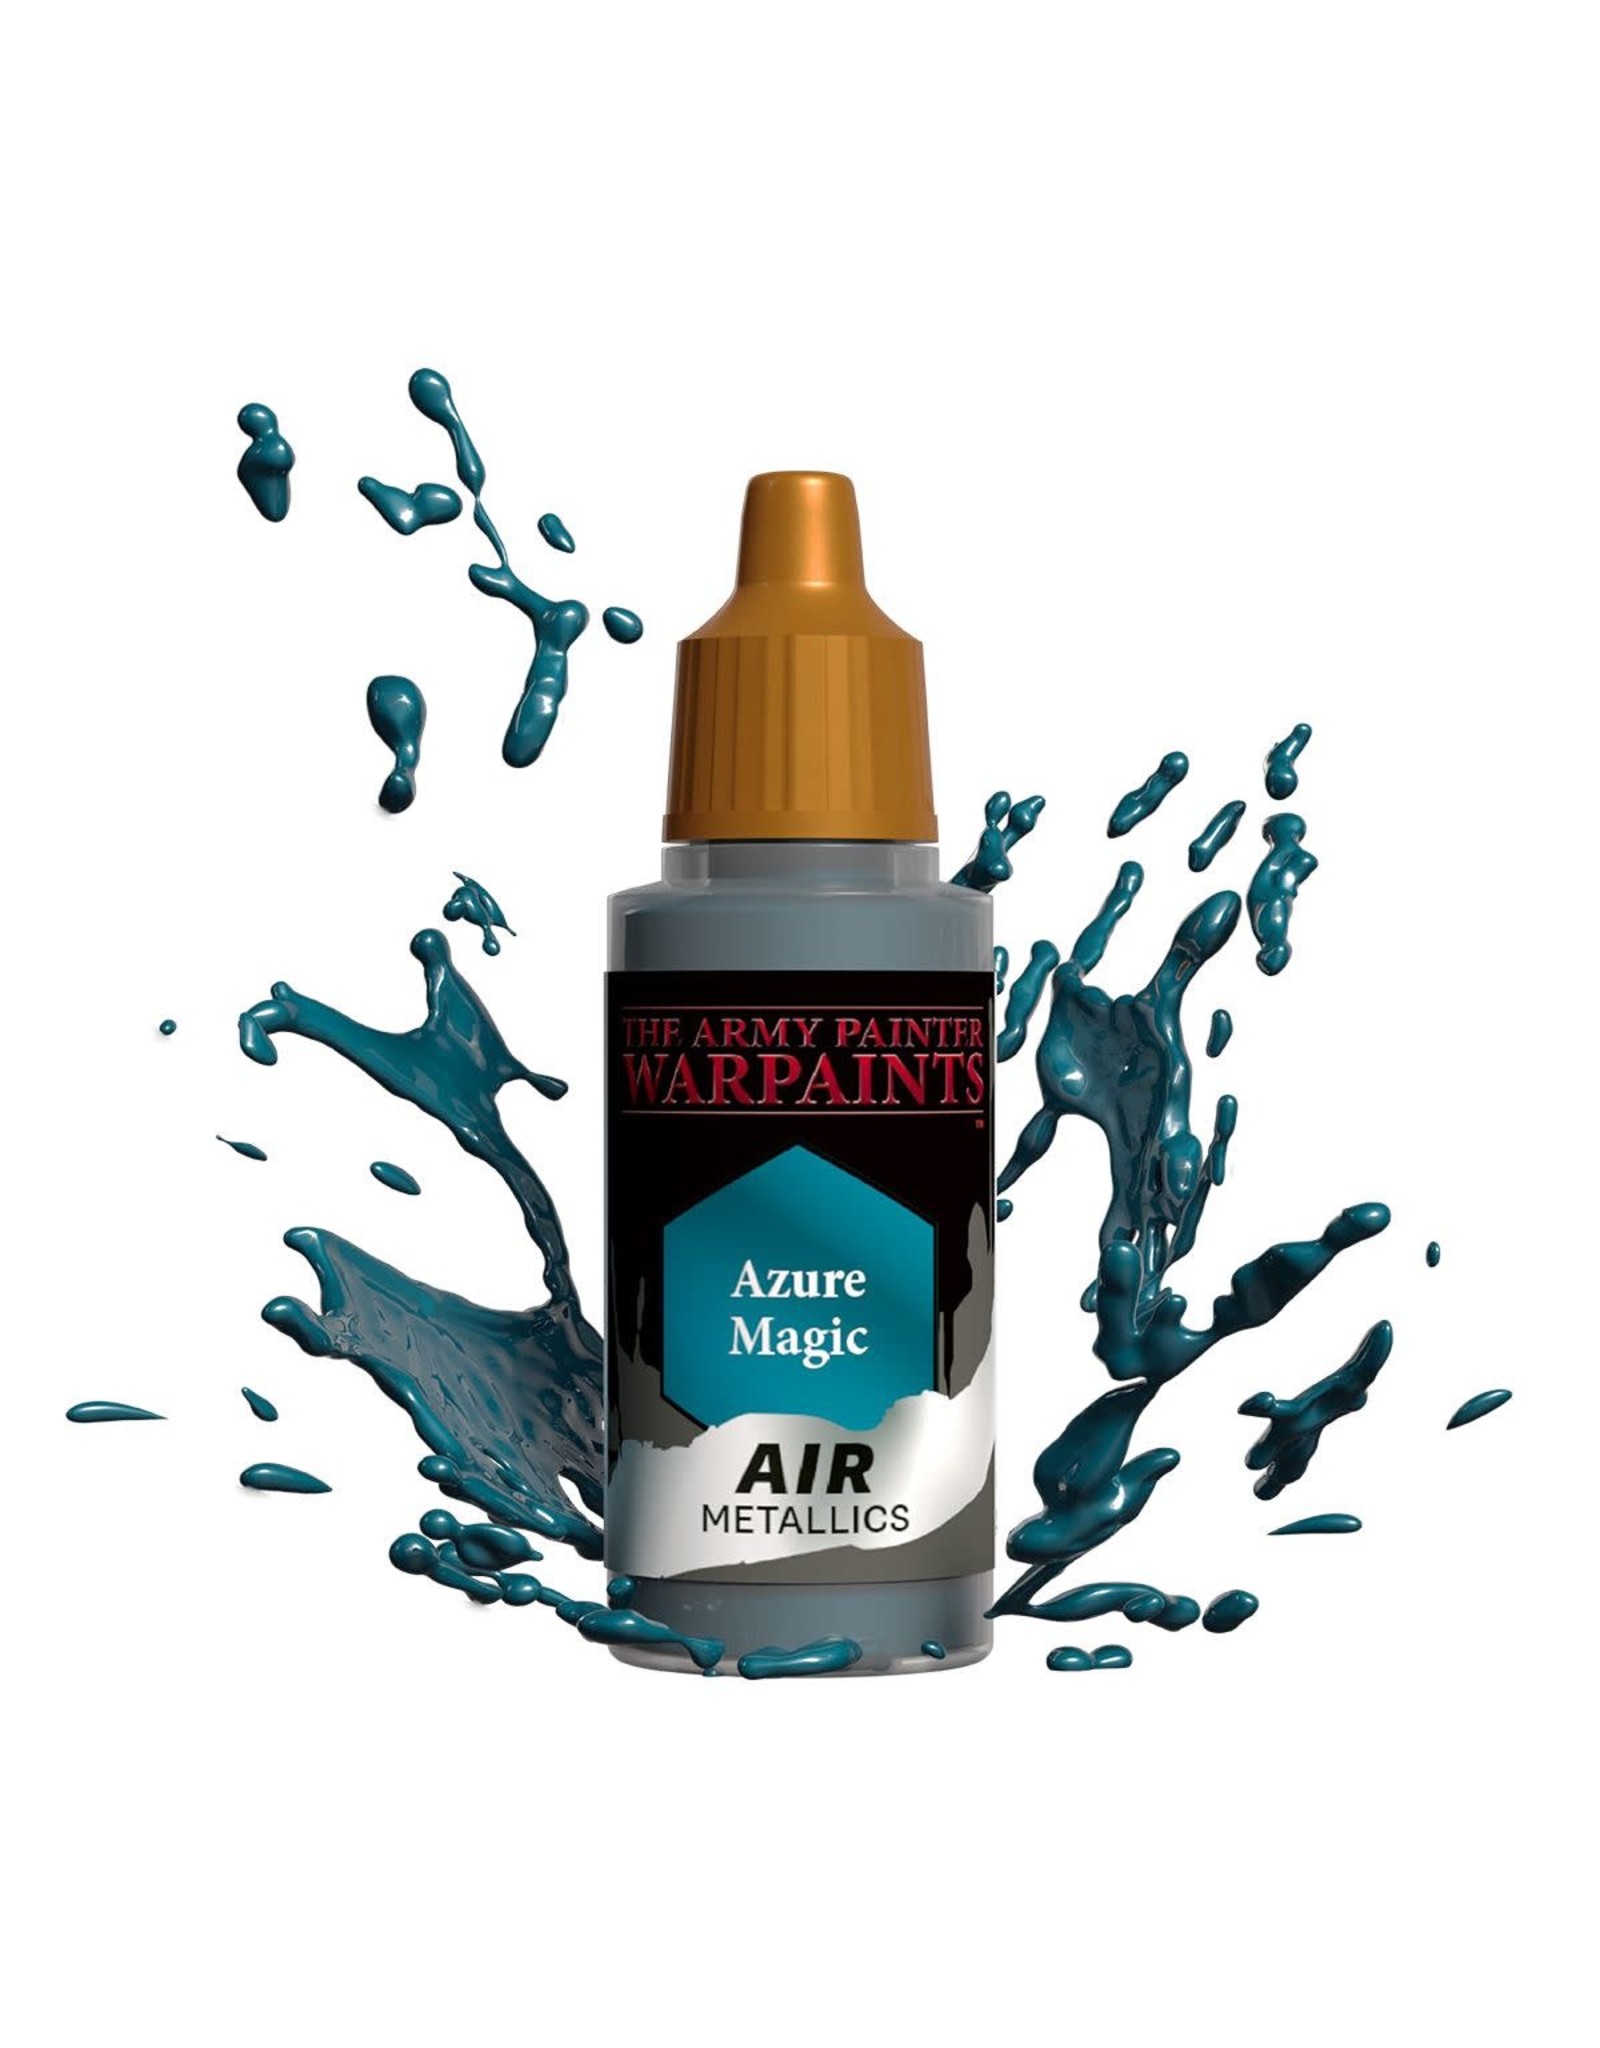 The Army Painter AW1486 Azure Magic